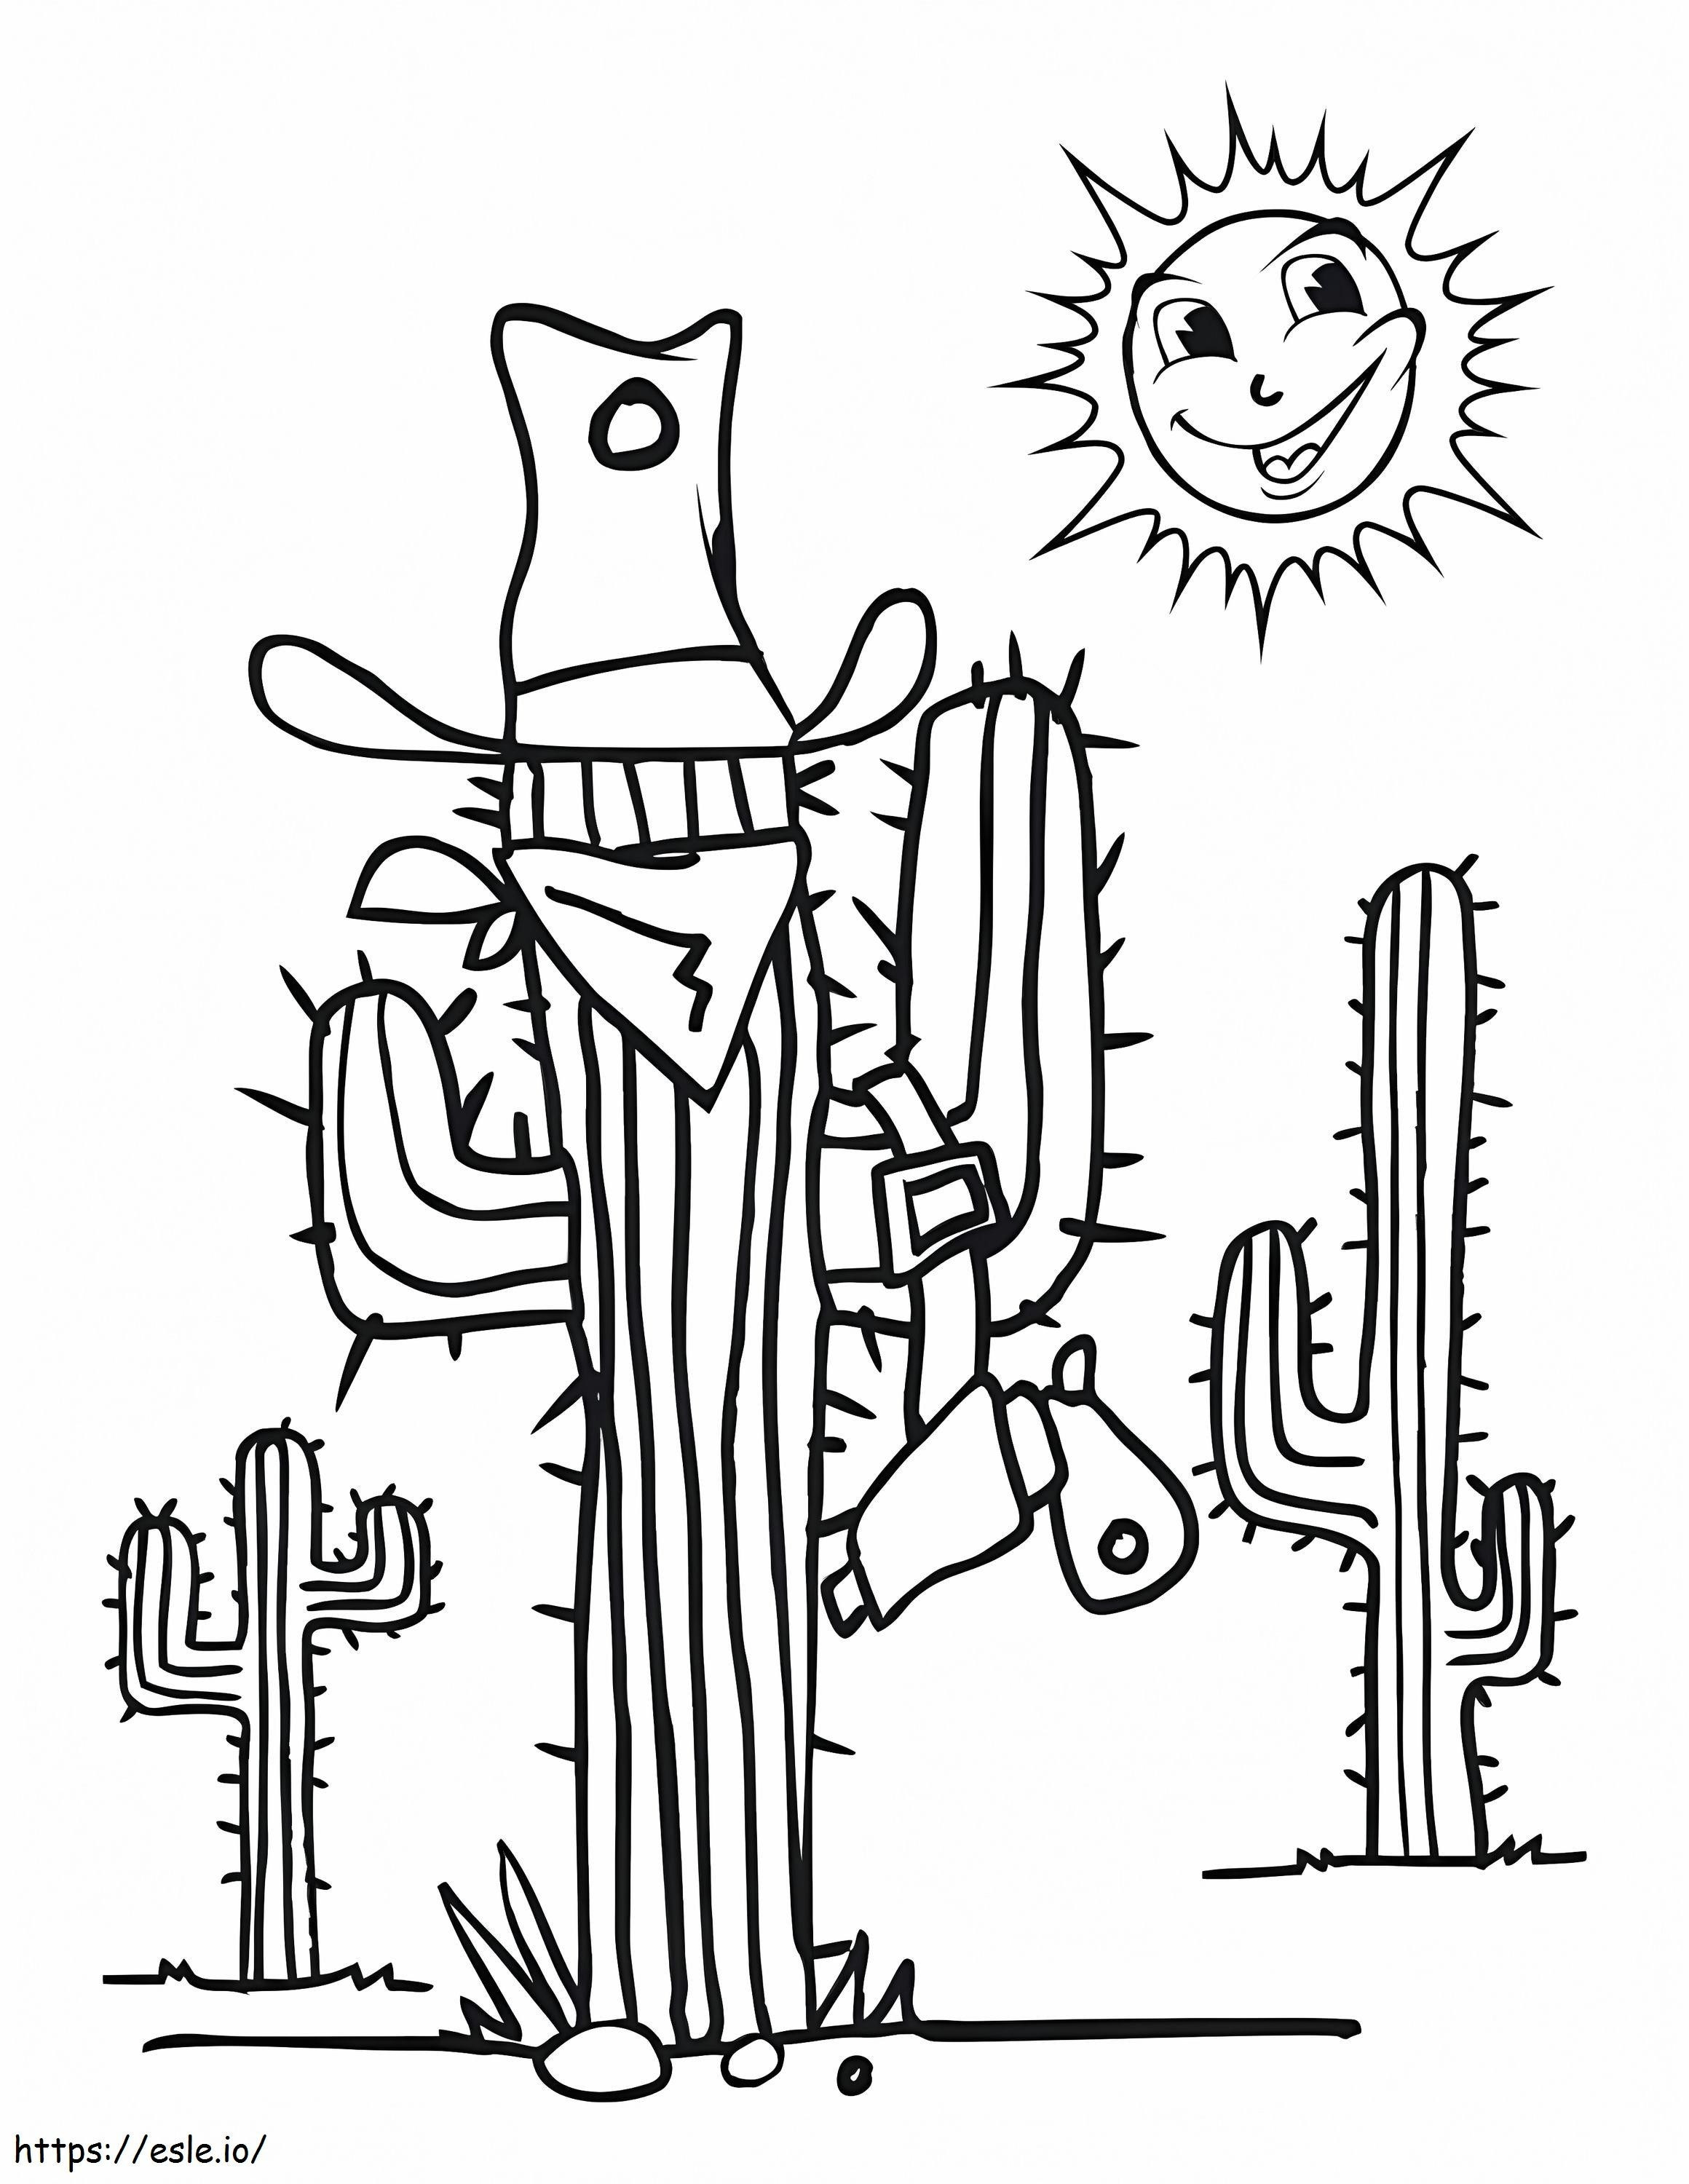 Cactus And Sun coloring page